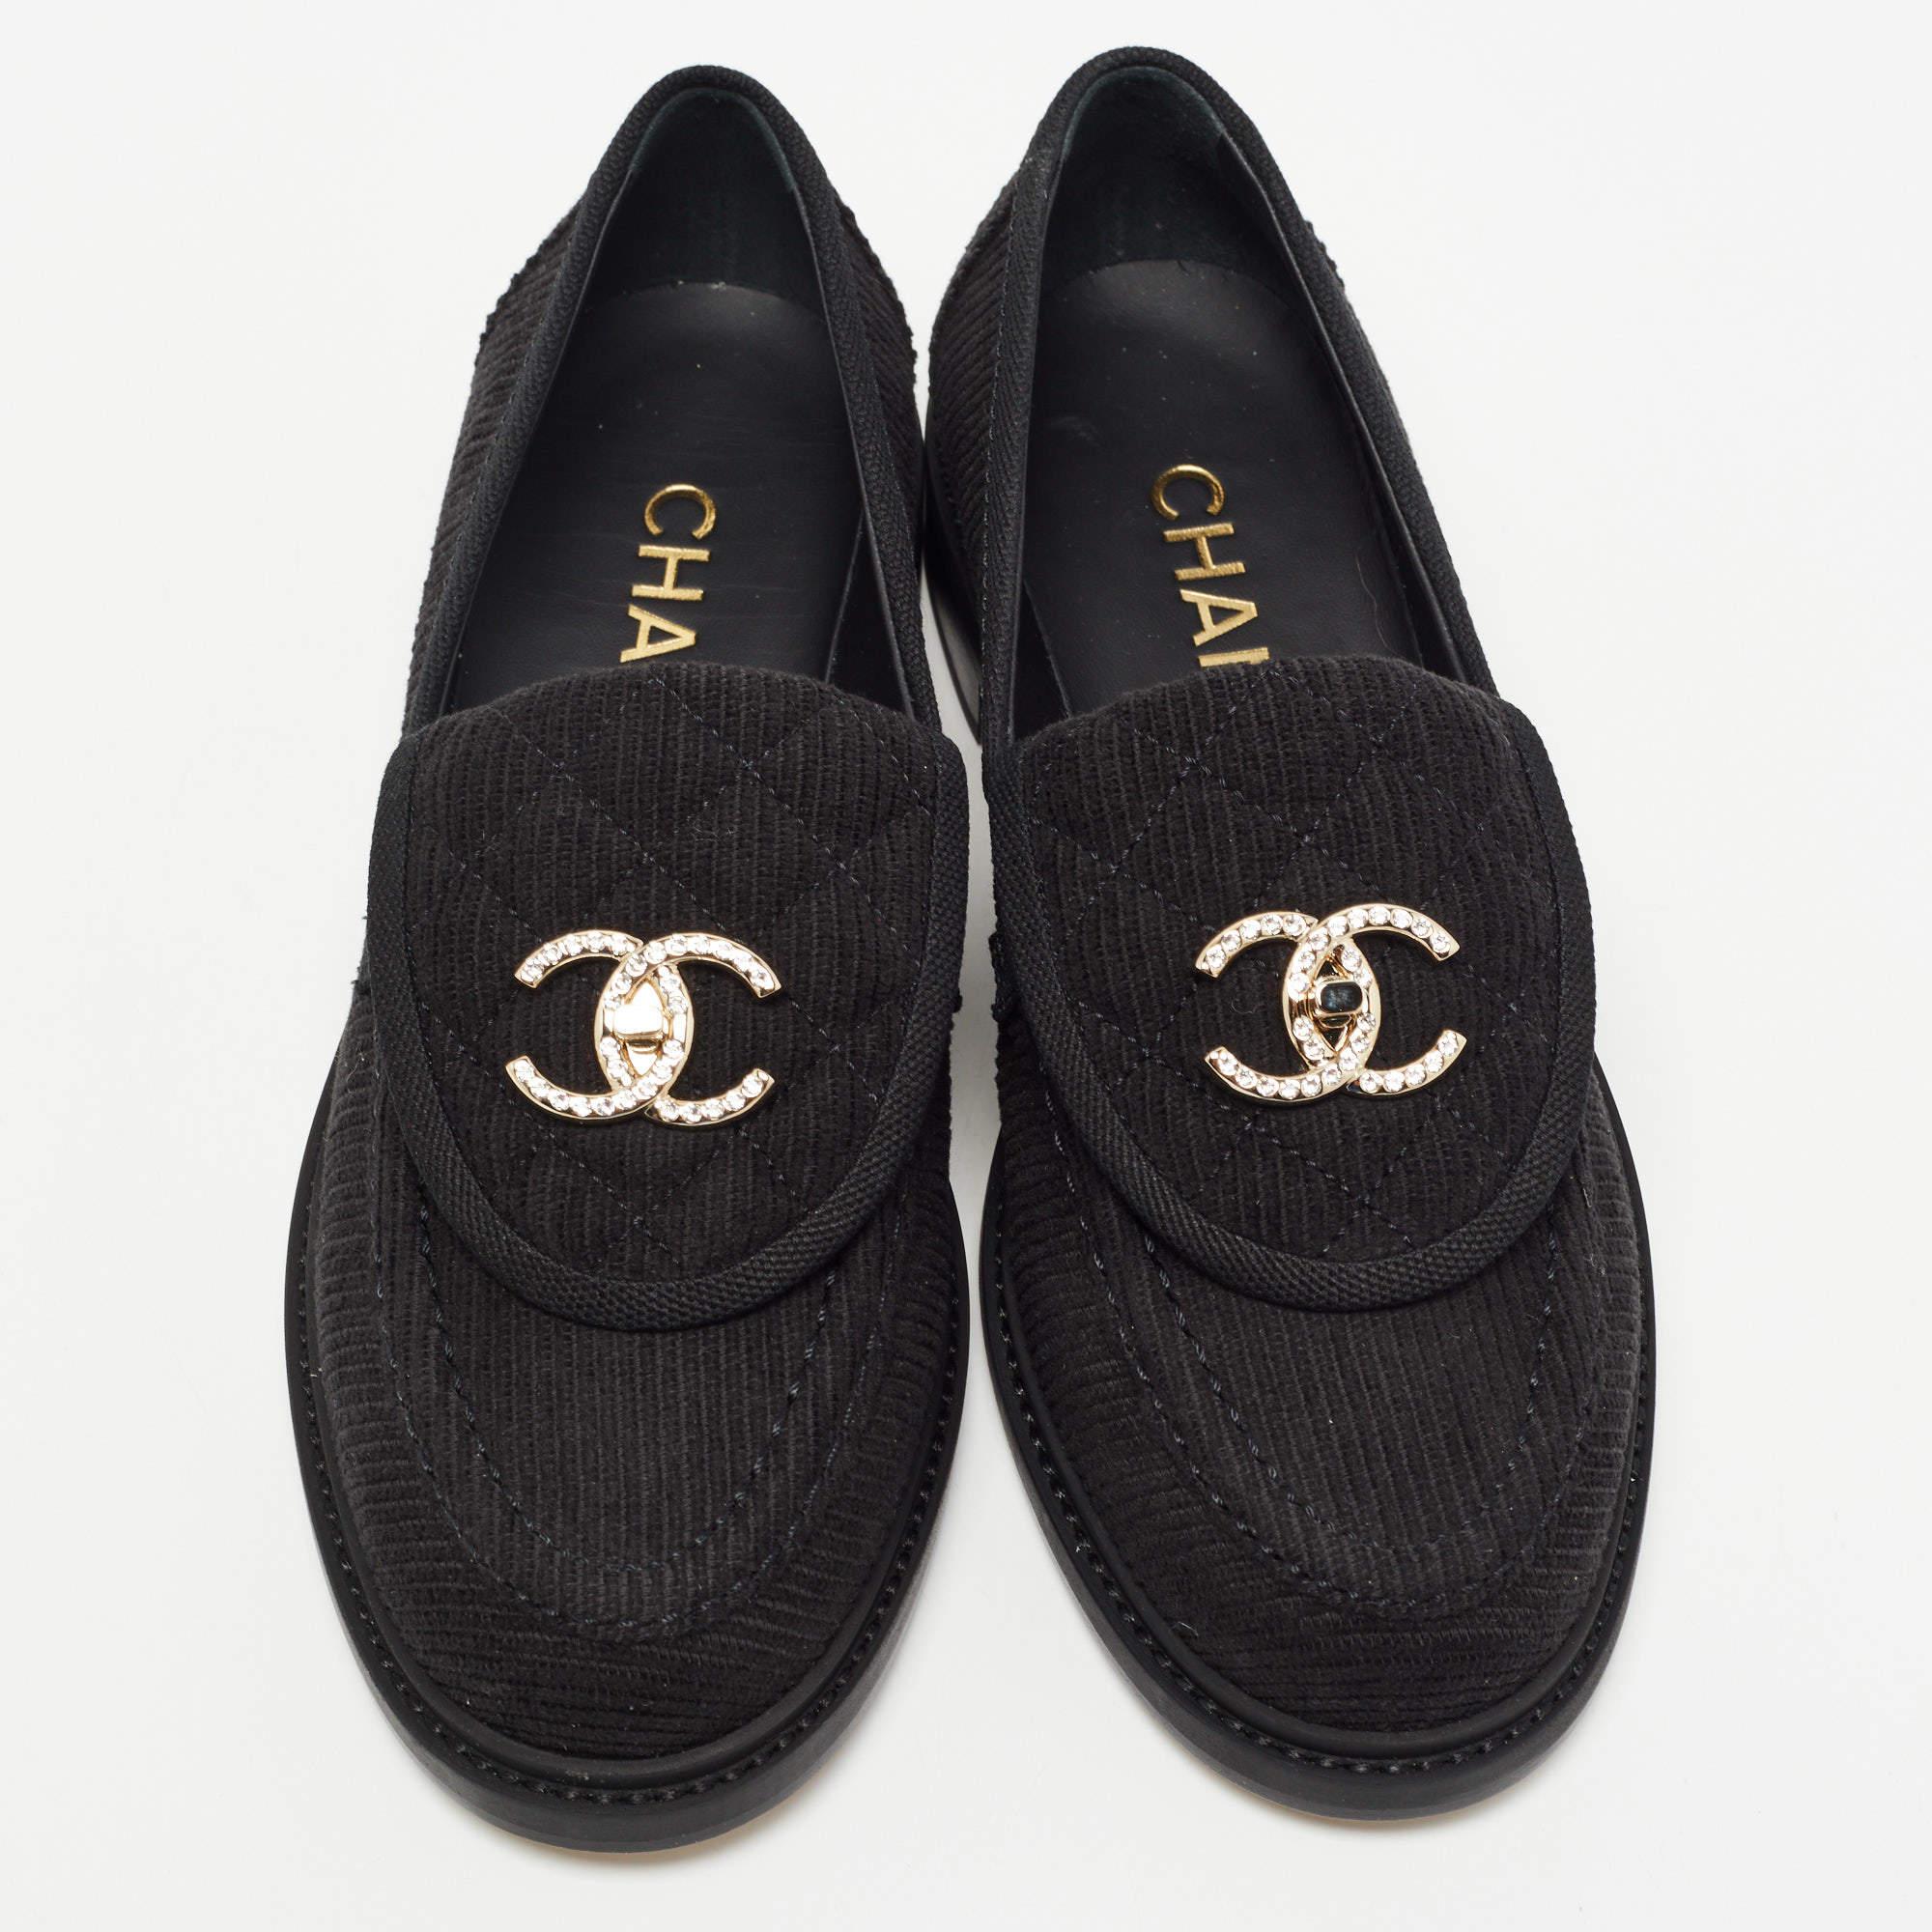 Let this comfortable pair be your first choice when you're out for a long day. These Chanel black shoes have well-sewn uppers beautifully set on durable soles.

Includes: Original Dustbag, Original Box, Info Booklet

